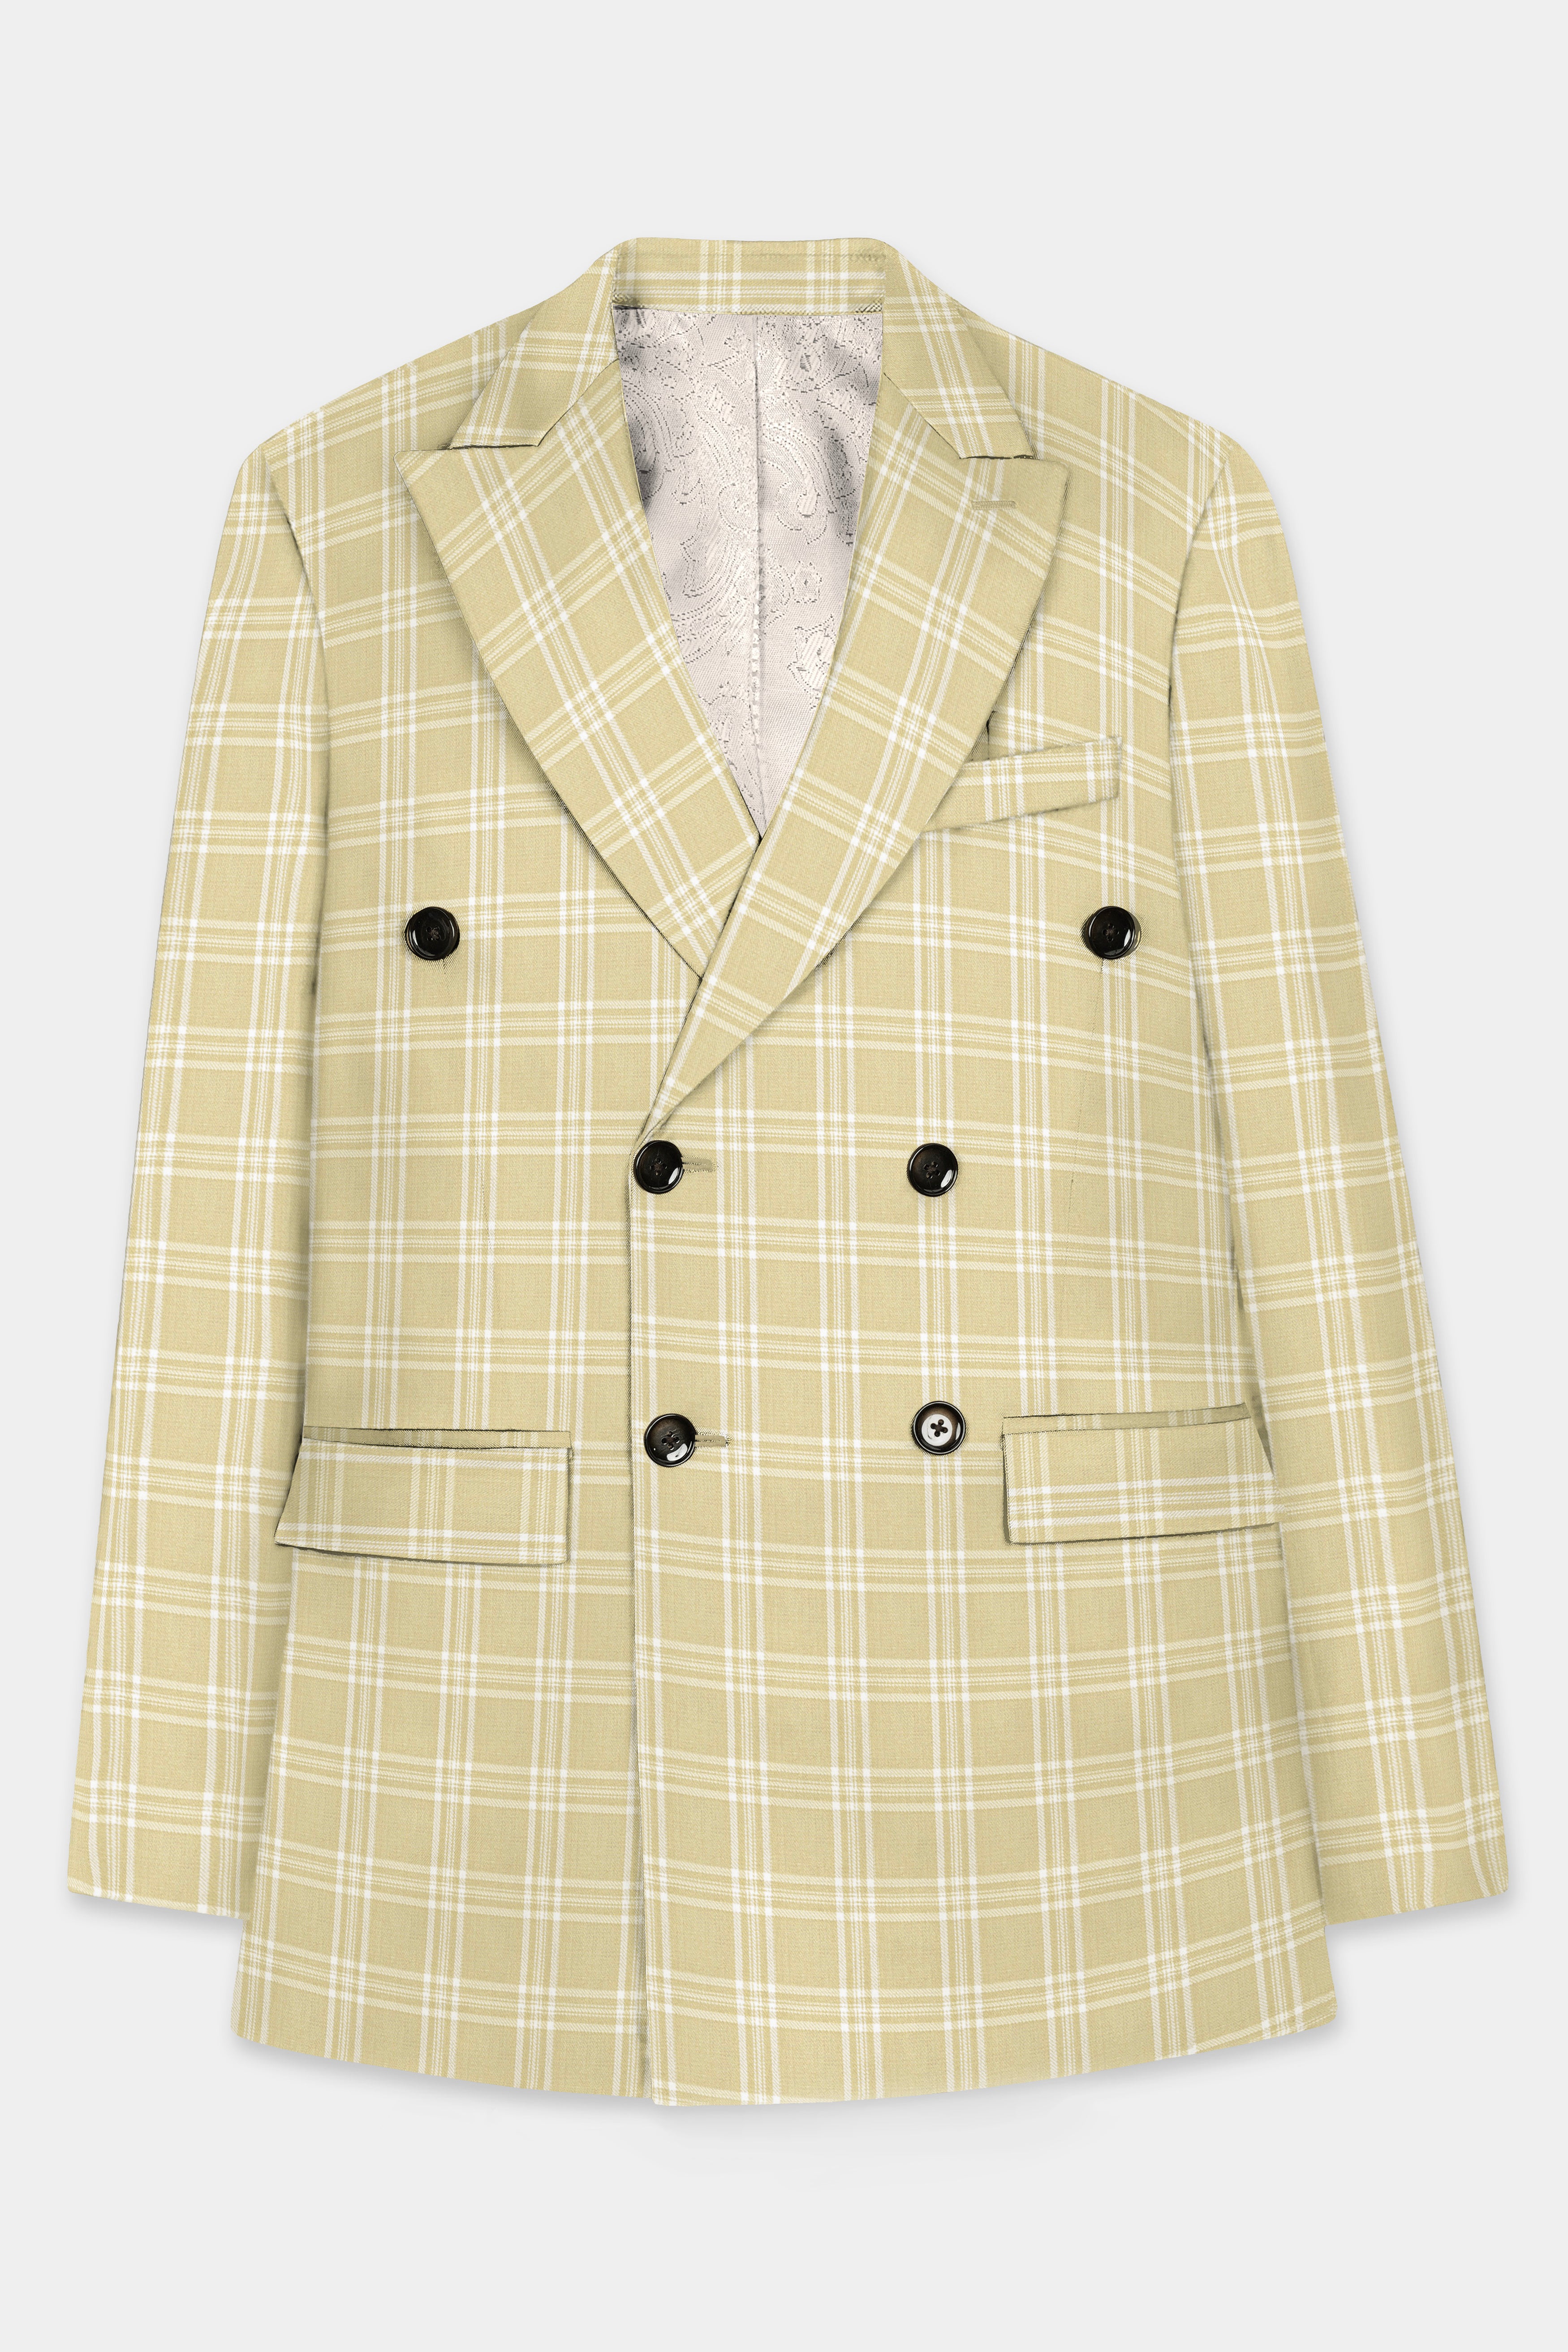 Desert Sand Cream Plaid Wool Blend Double Breasted Suit